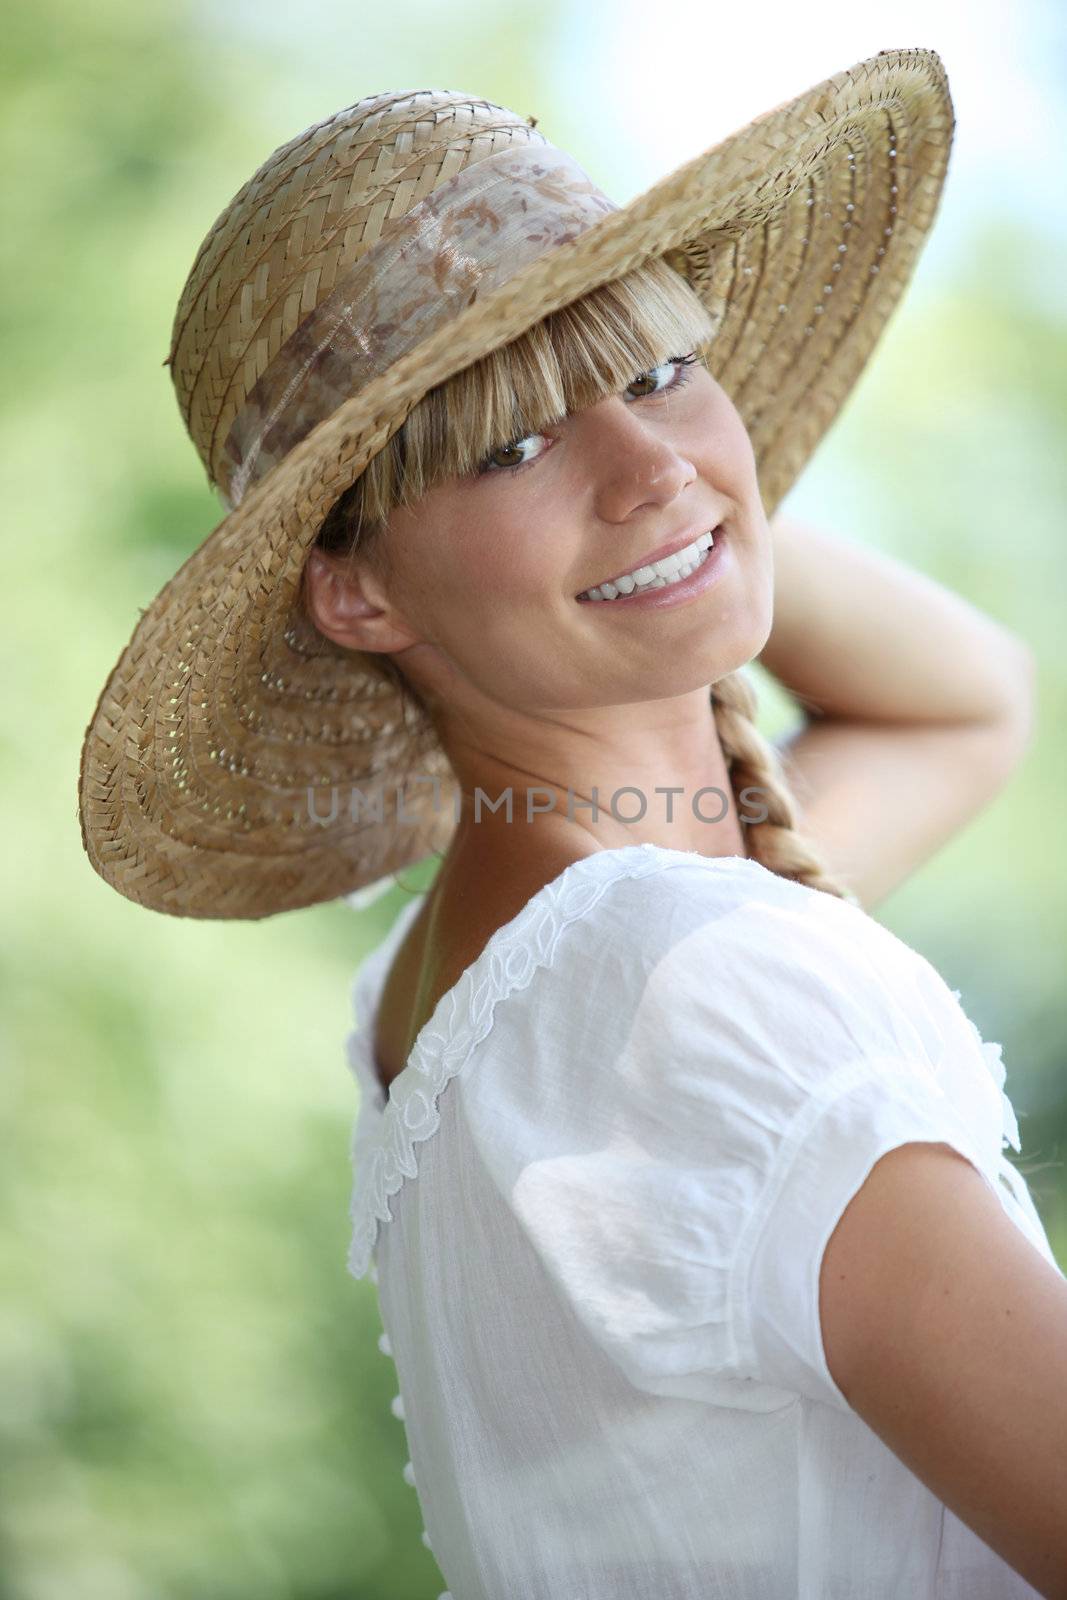 Woman smiling with straw hat by phovoir